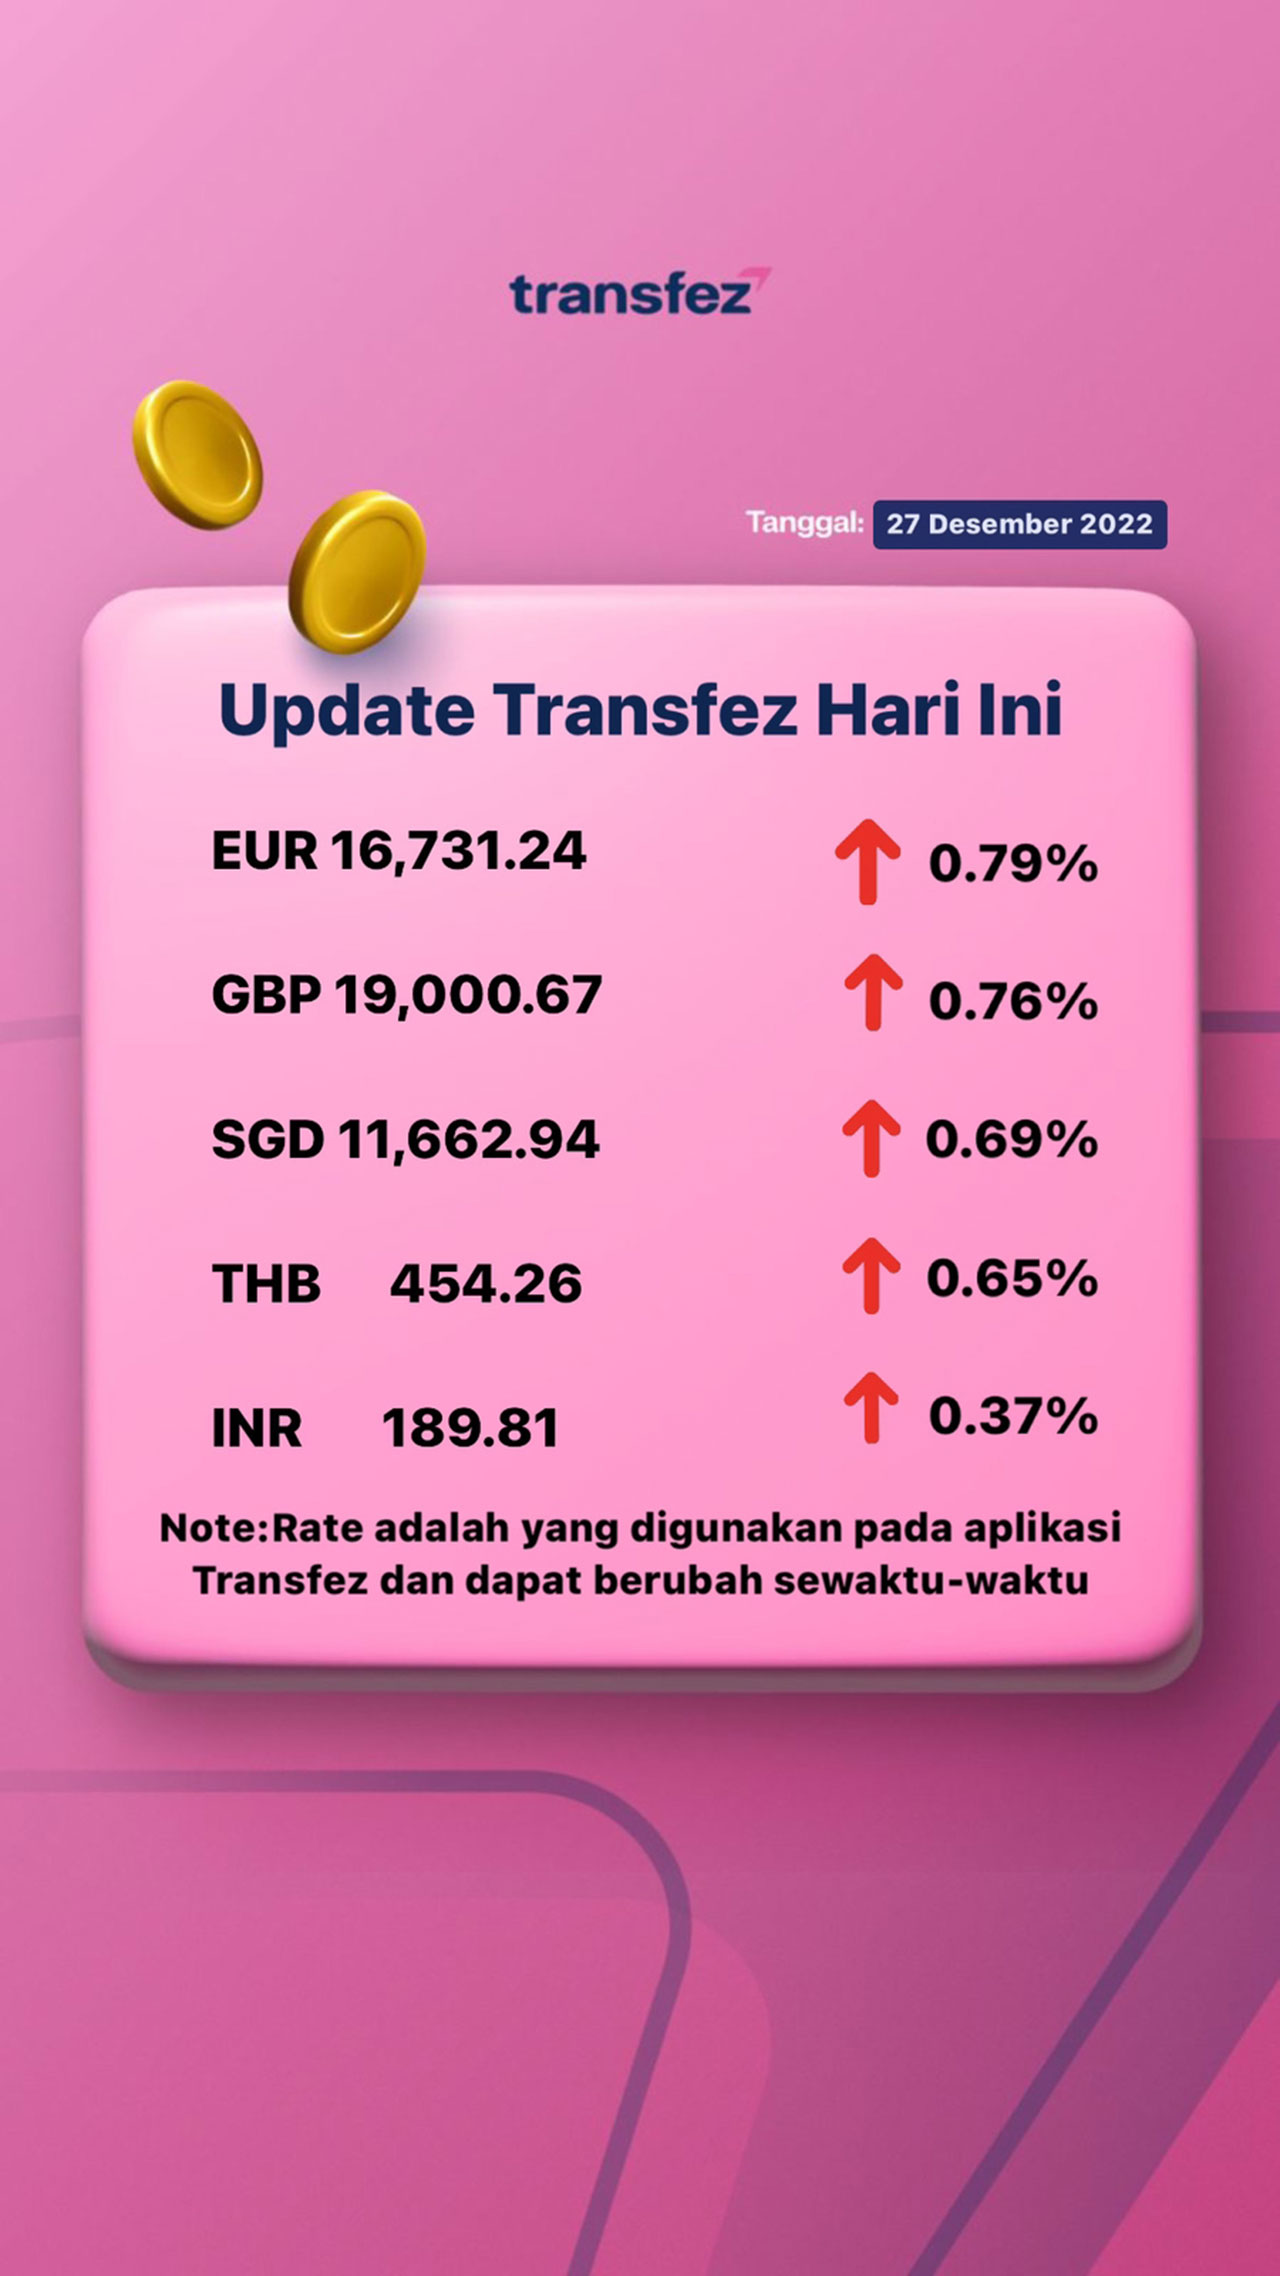 Today's Transfez Rate Update 27 December 2022